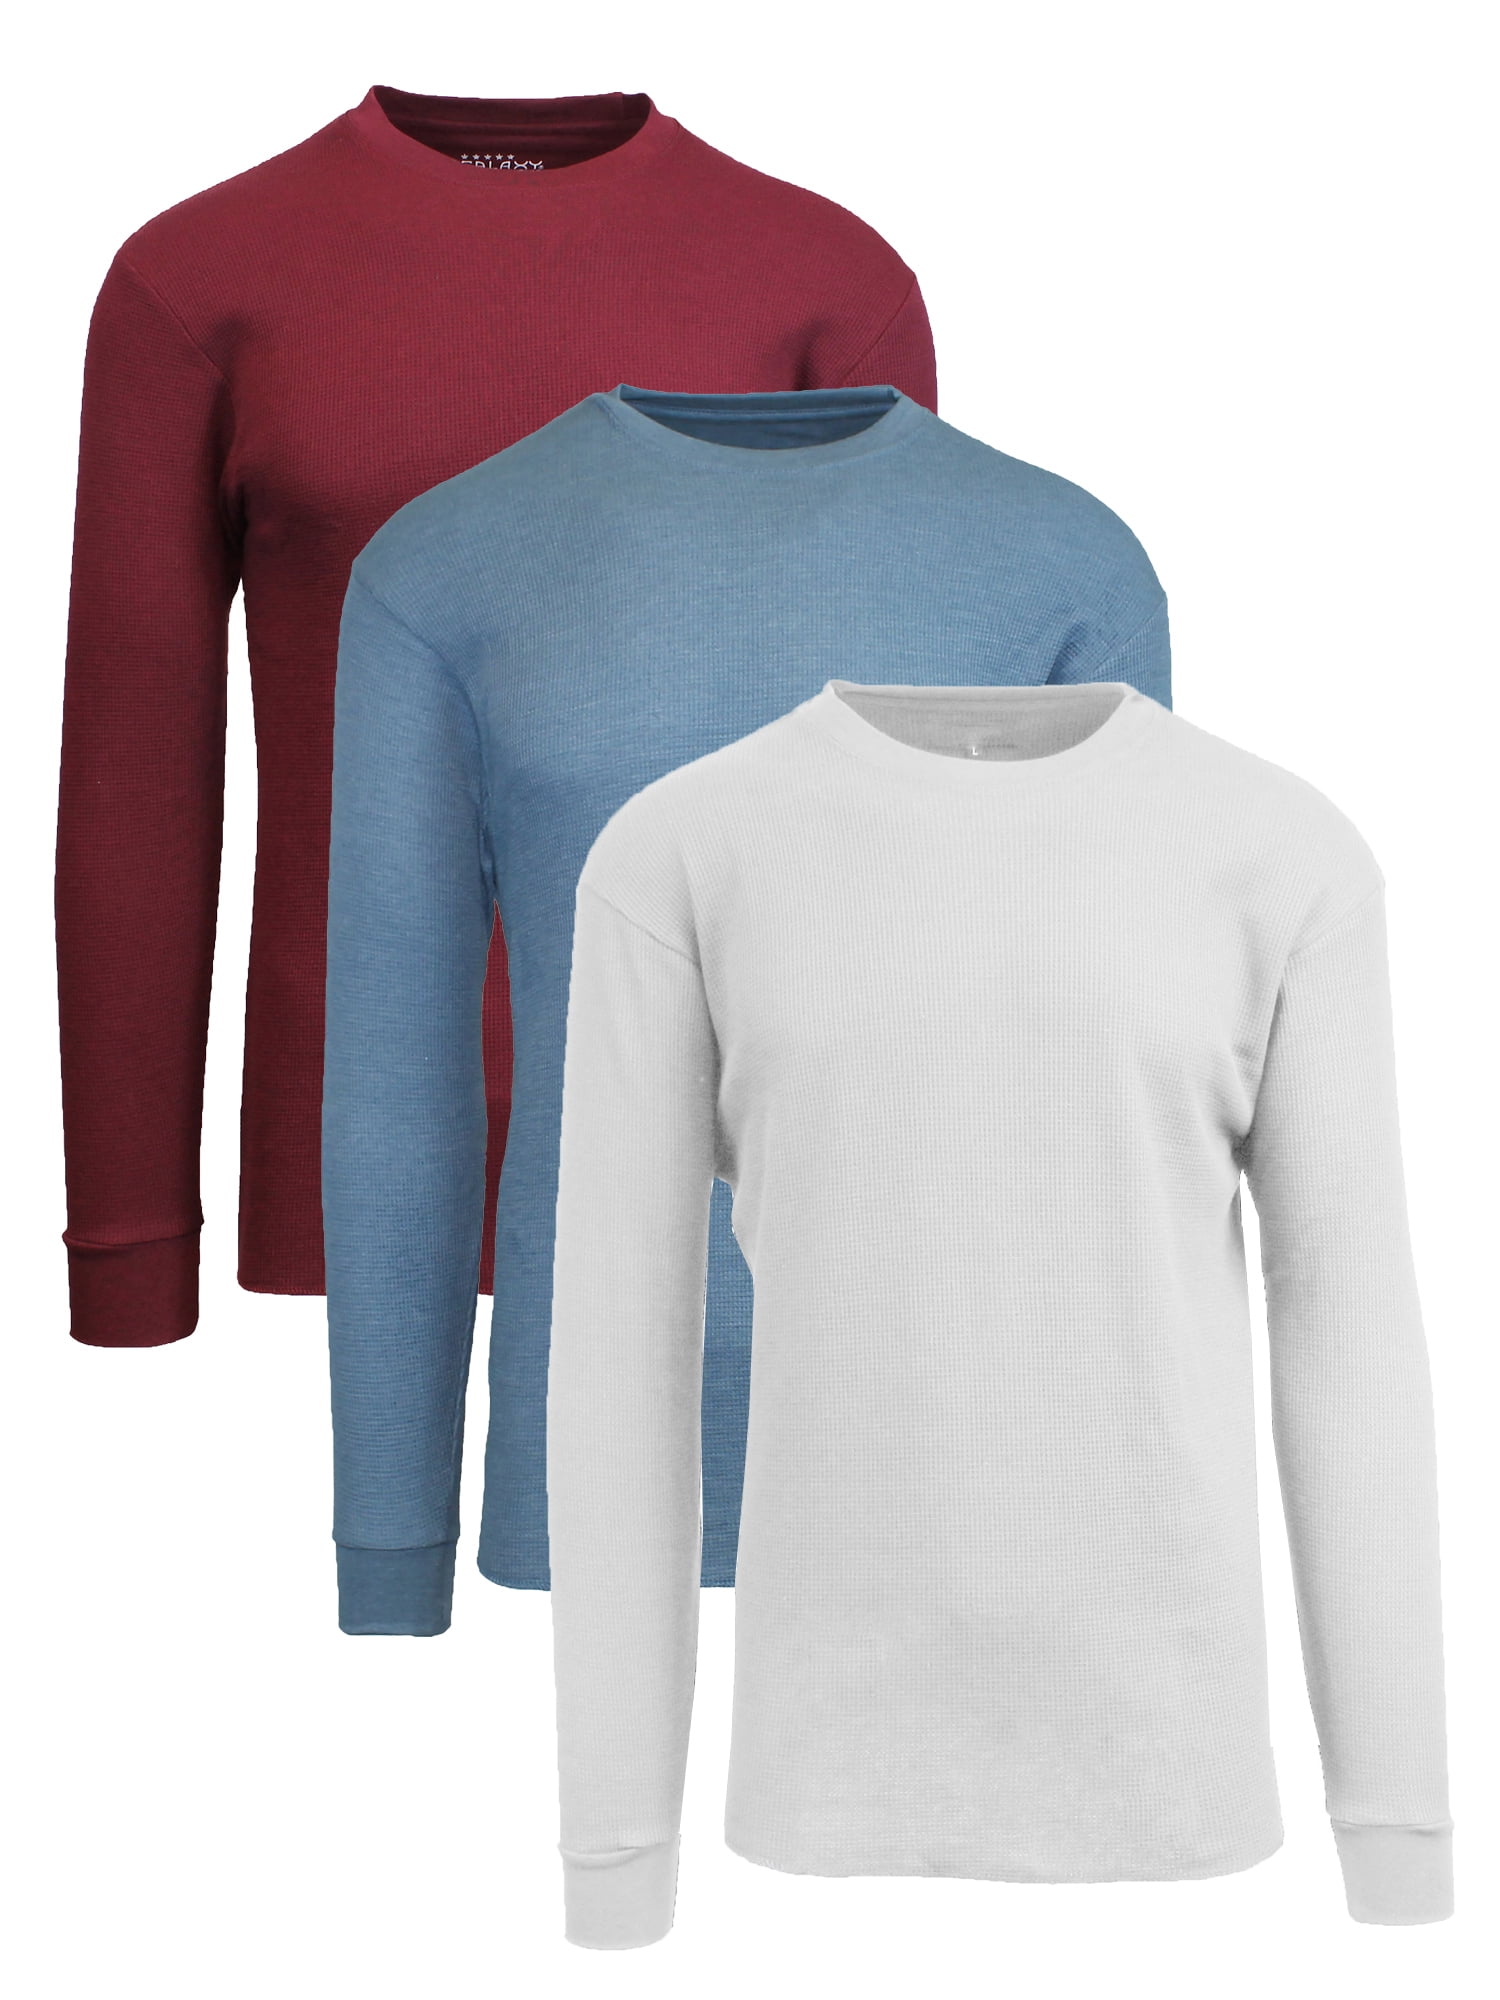 HEAT CONTROL SUPER THERMAL LONG SLEEVES T-SHIRT WARM 0.45 TOG RATING FOR MEN 